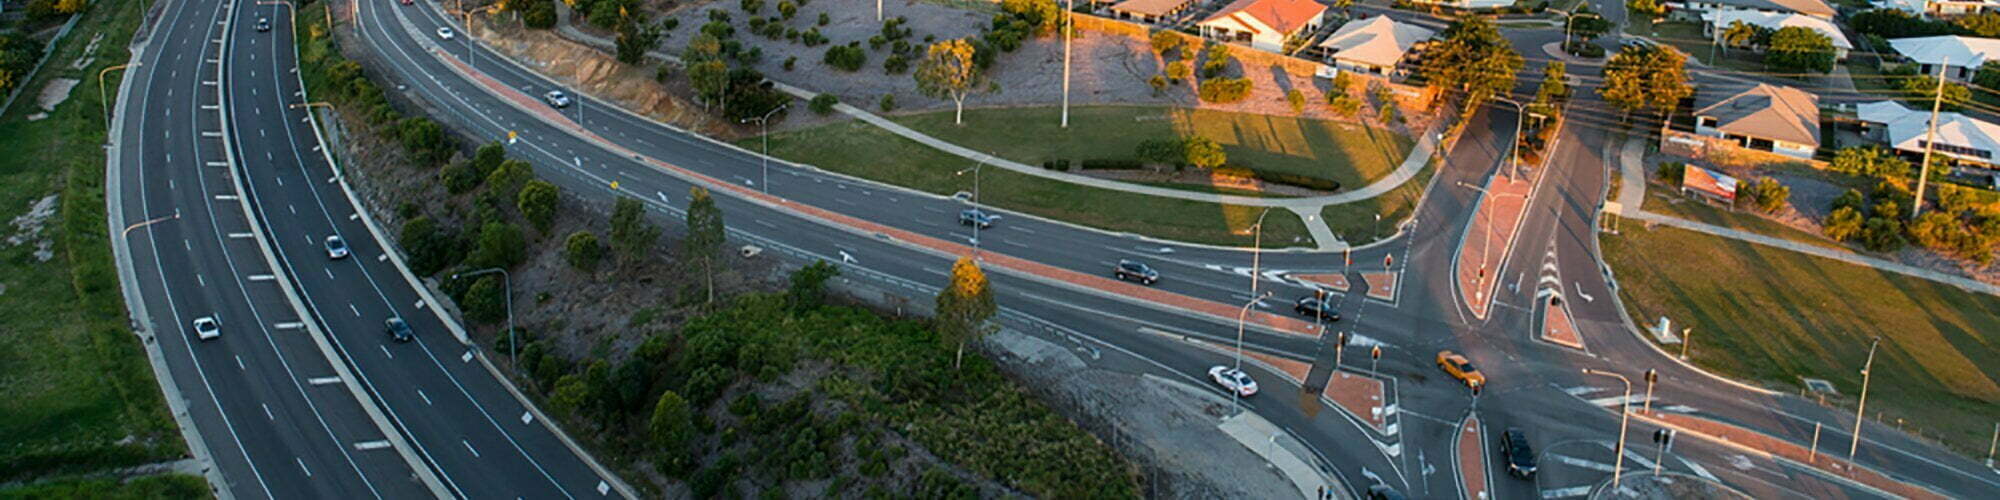 Image for TOWNSVILLE RING ROAD